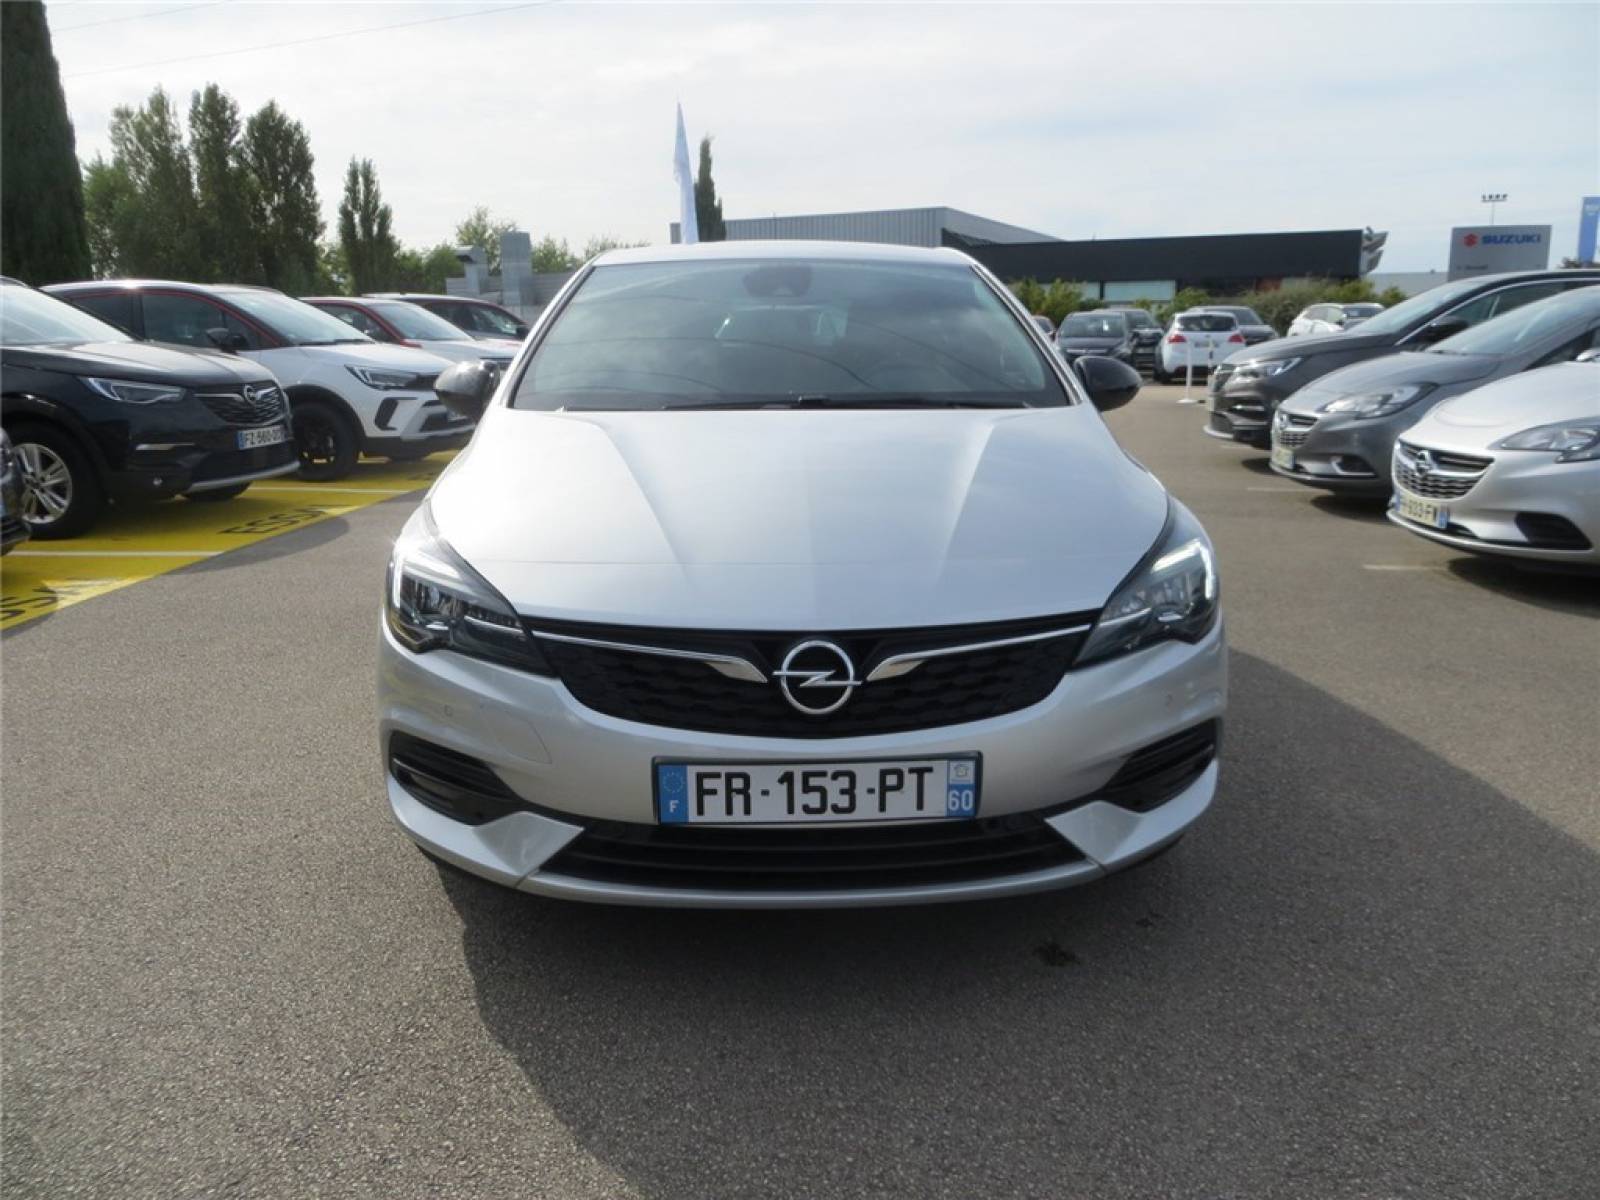 OPEL Astra 1.2 Turbo 130 ch BVM6 - véhicule d'occasion - Groupe Guillet - Opel Magicauto - Chalon-sur-Saône - 71380 - Saint-Marcel - 2